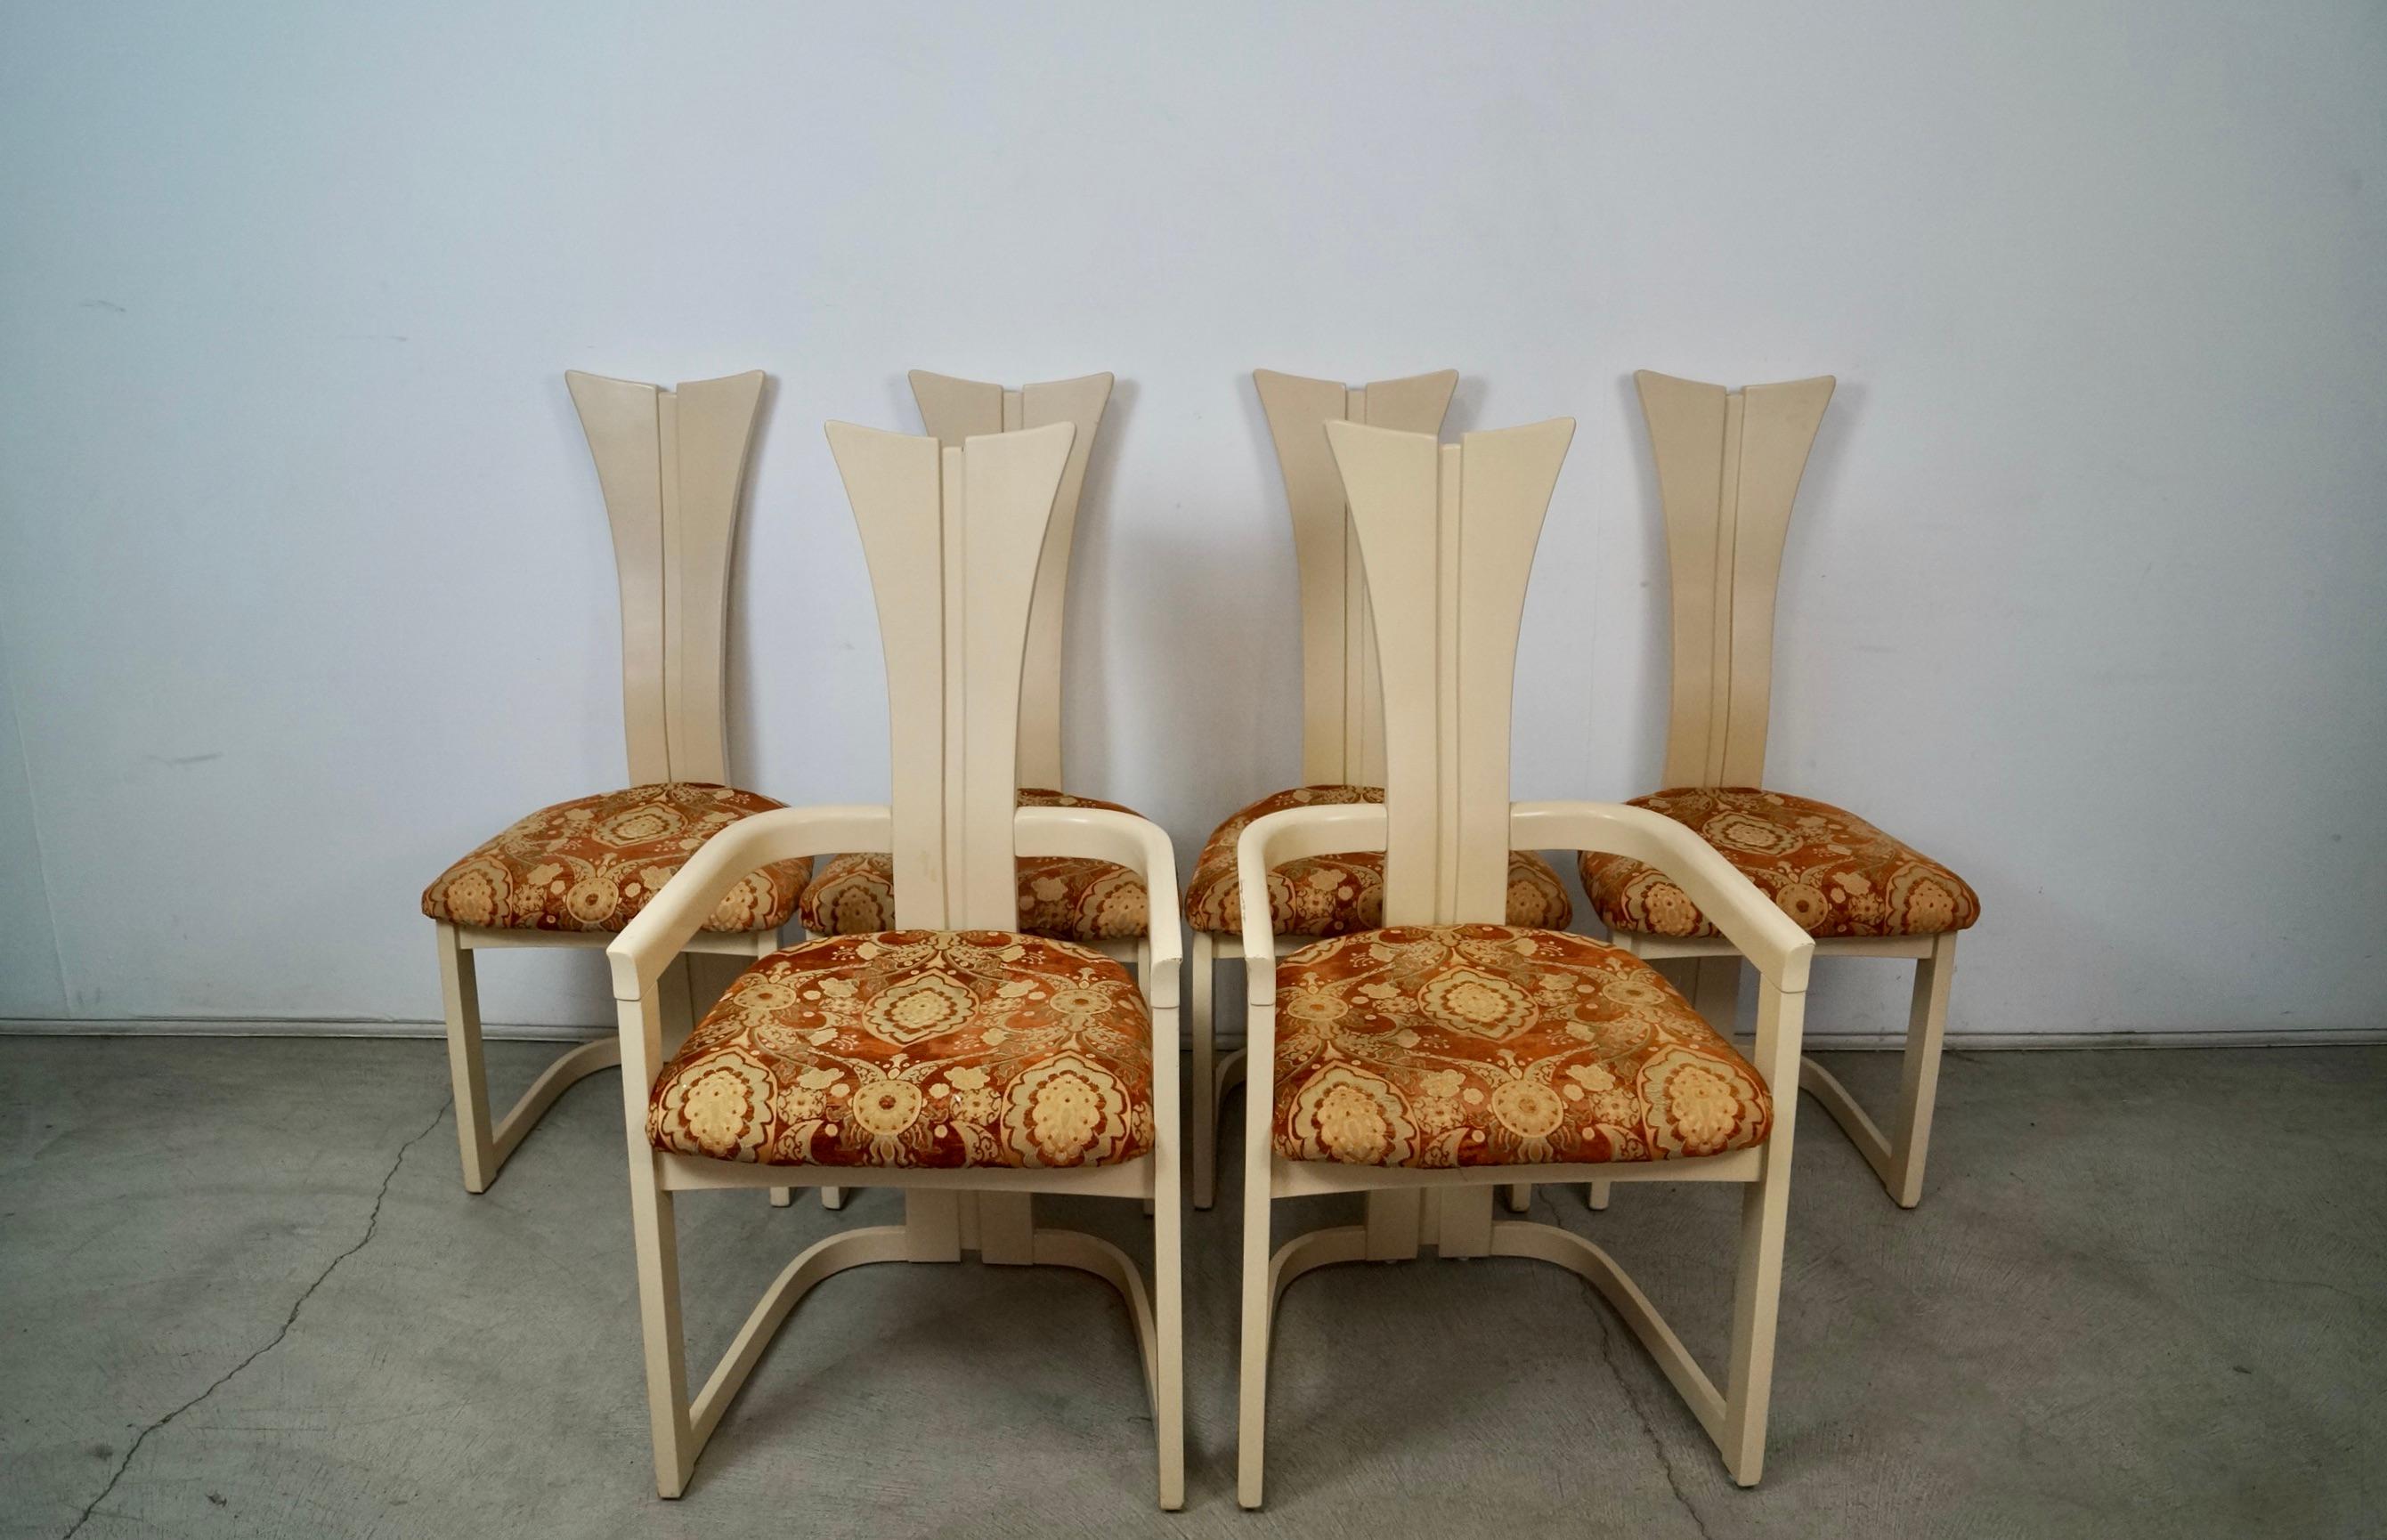 Post-Modern 1970's Postmodern Art Deco Italian Lacquered Dining Chairs - Set of Six For Sale